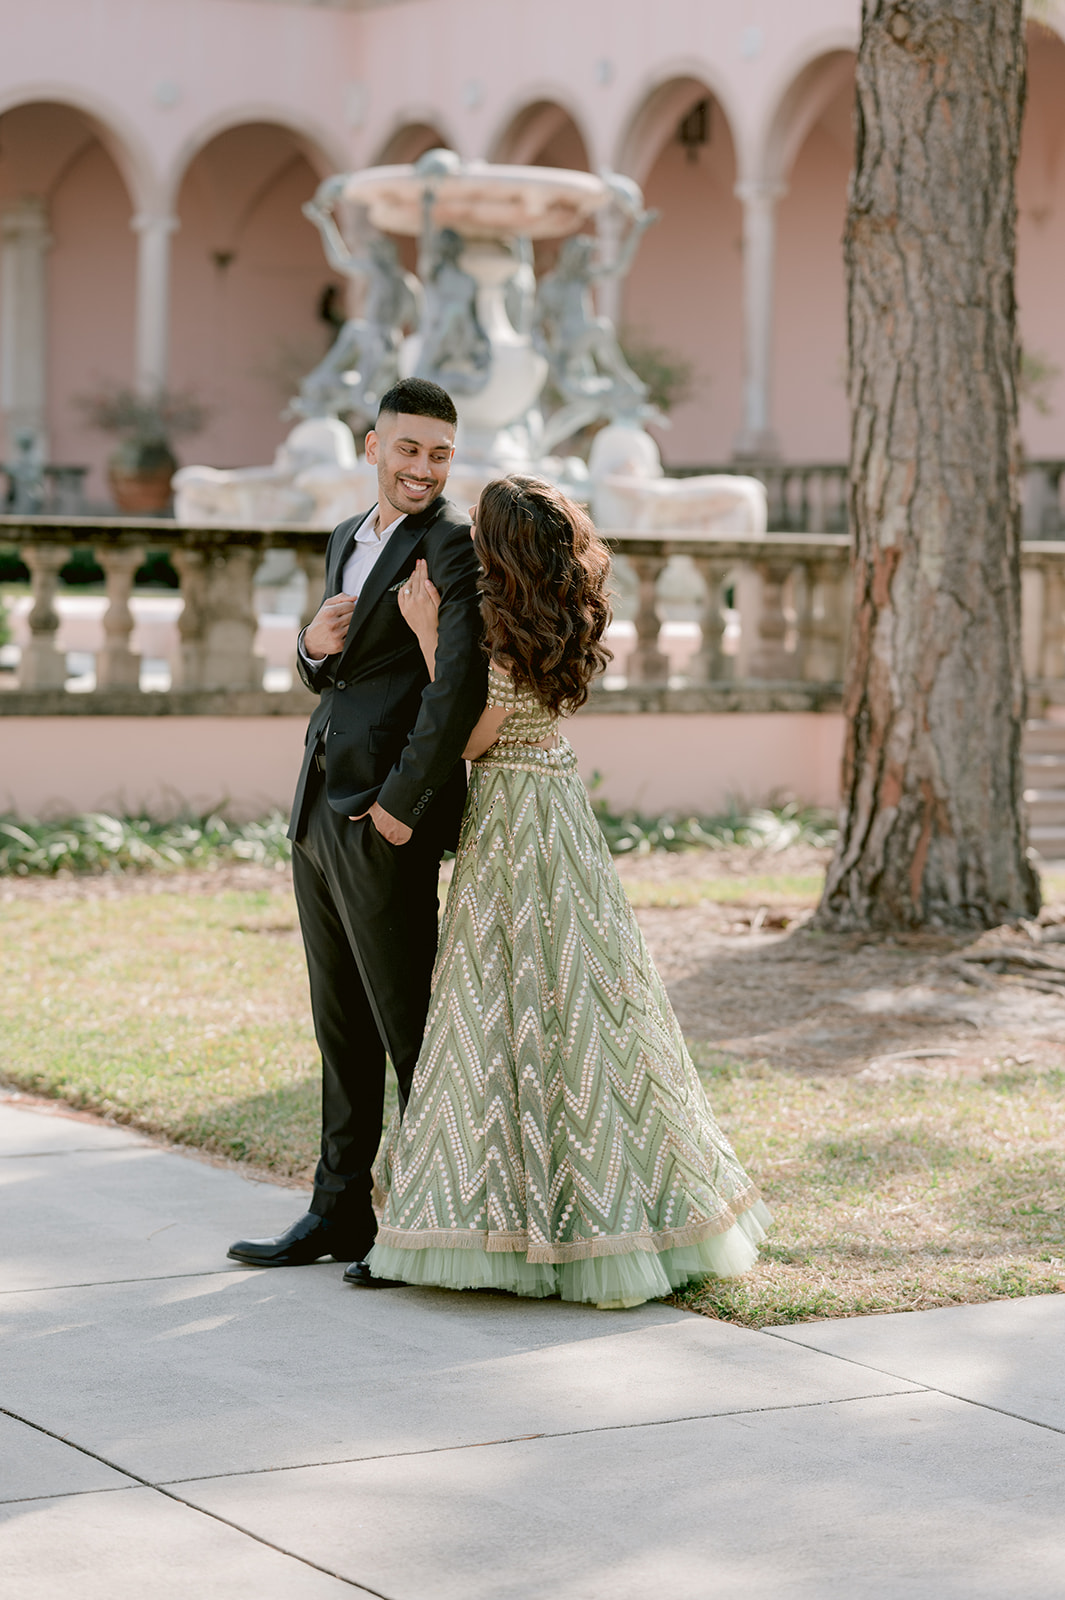 "Beautiful Indian couple captured in front of the Ca' d'Zan mansion at the Ringling Museum"
